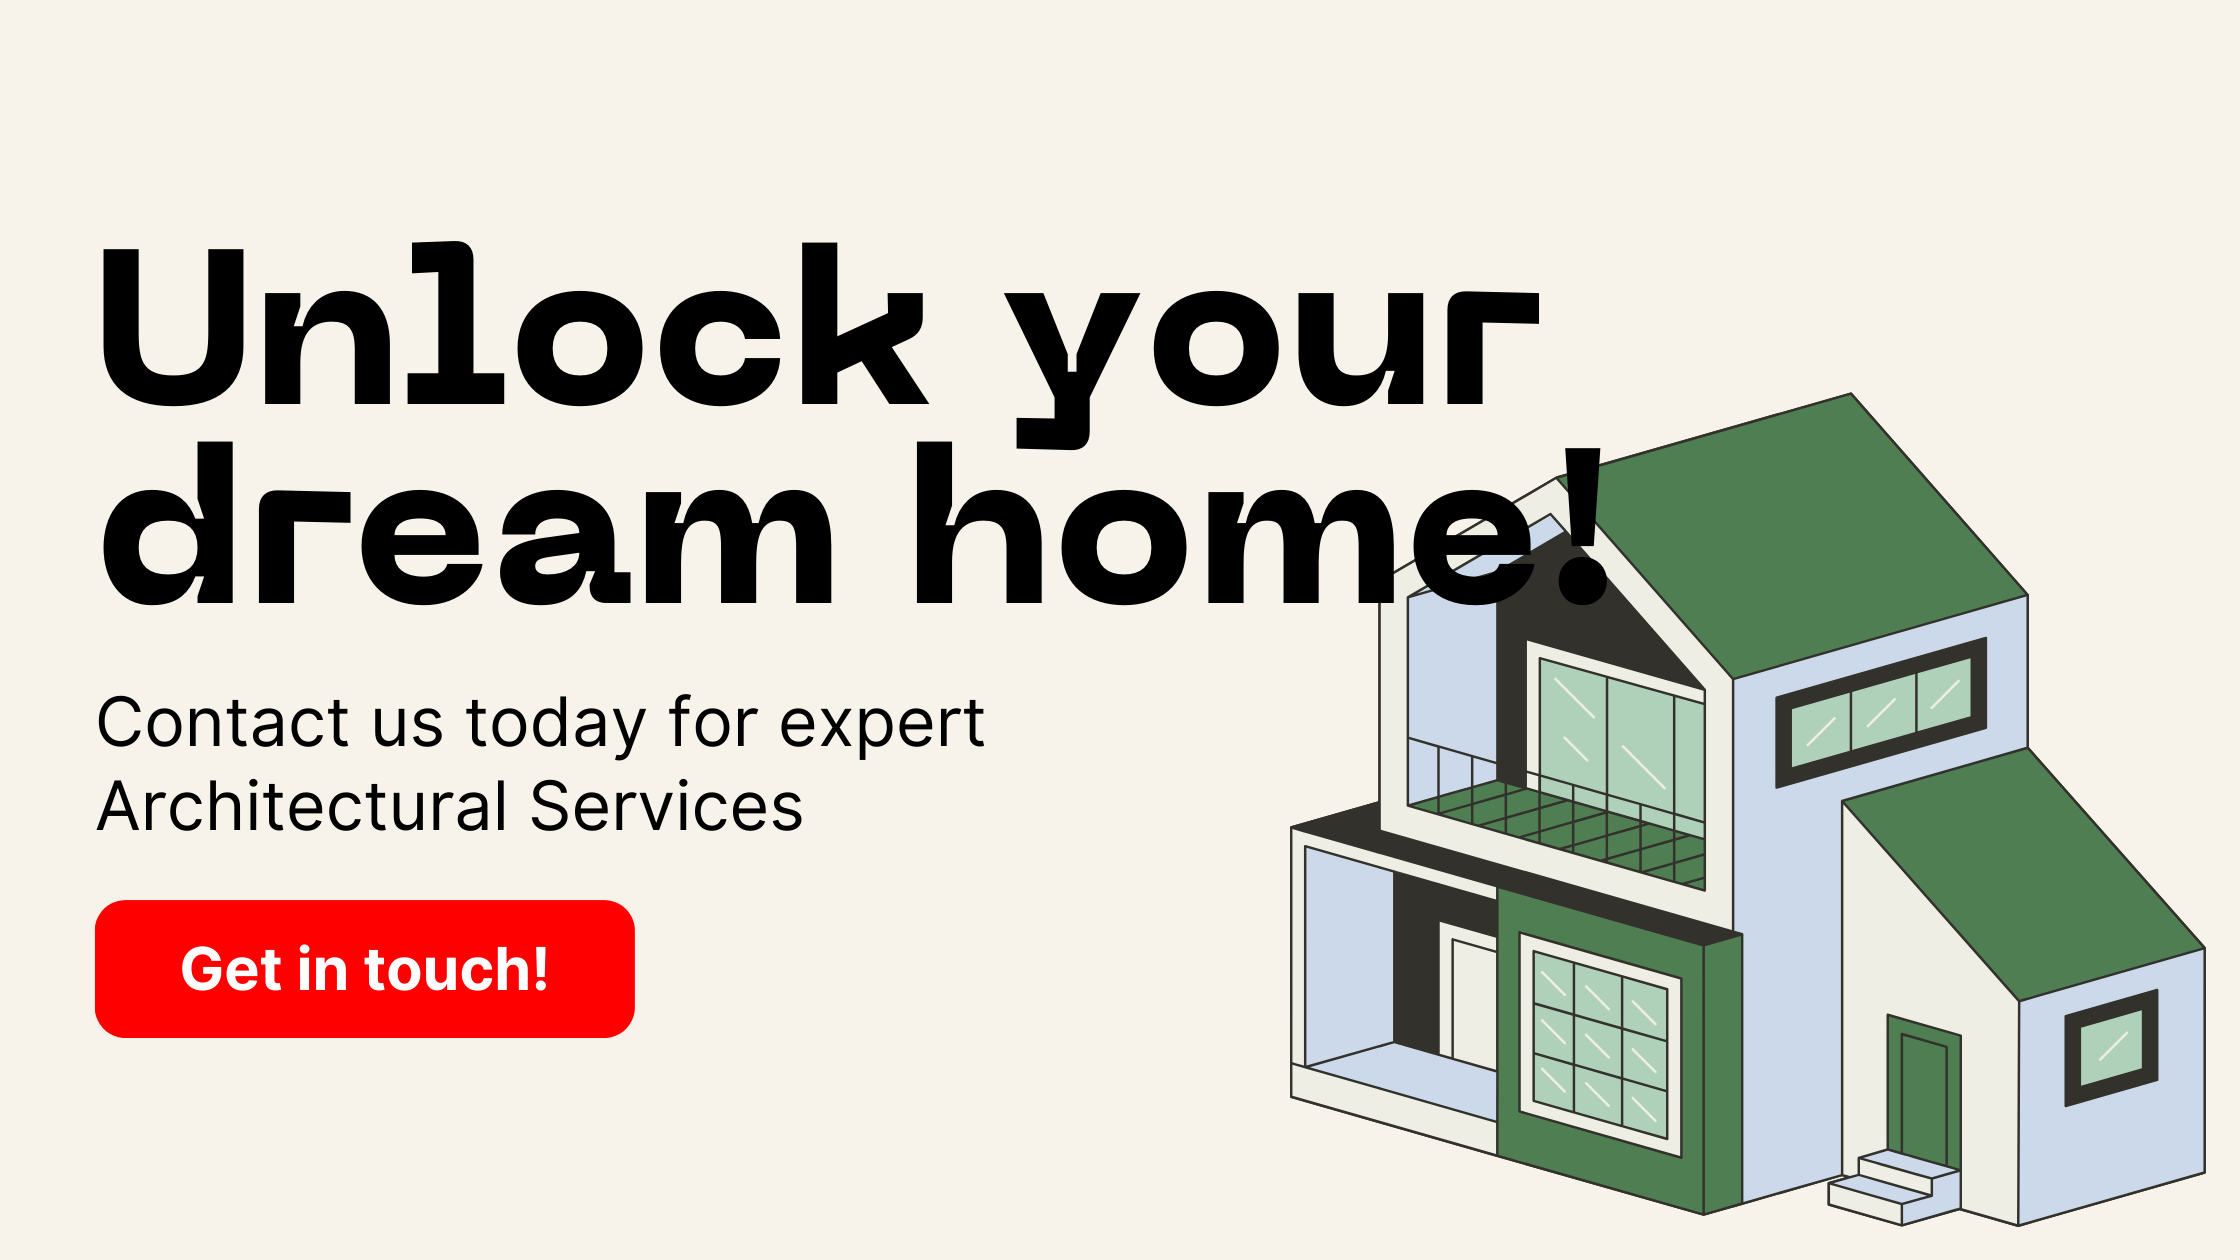 Unlock your dream home! Contact us today for expert Architectural Services